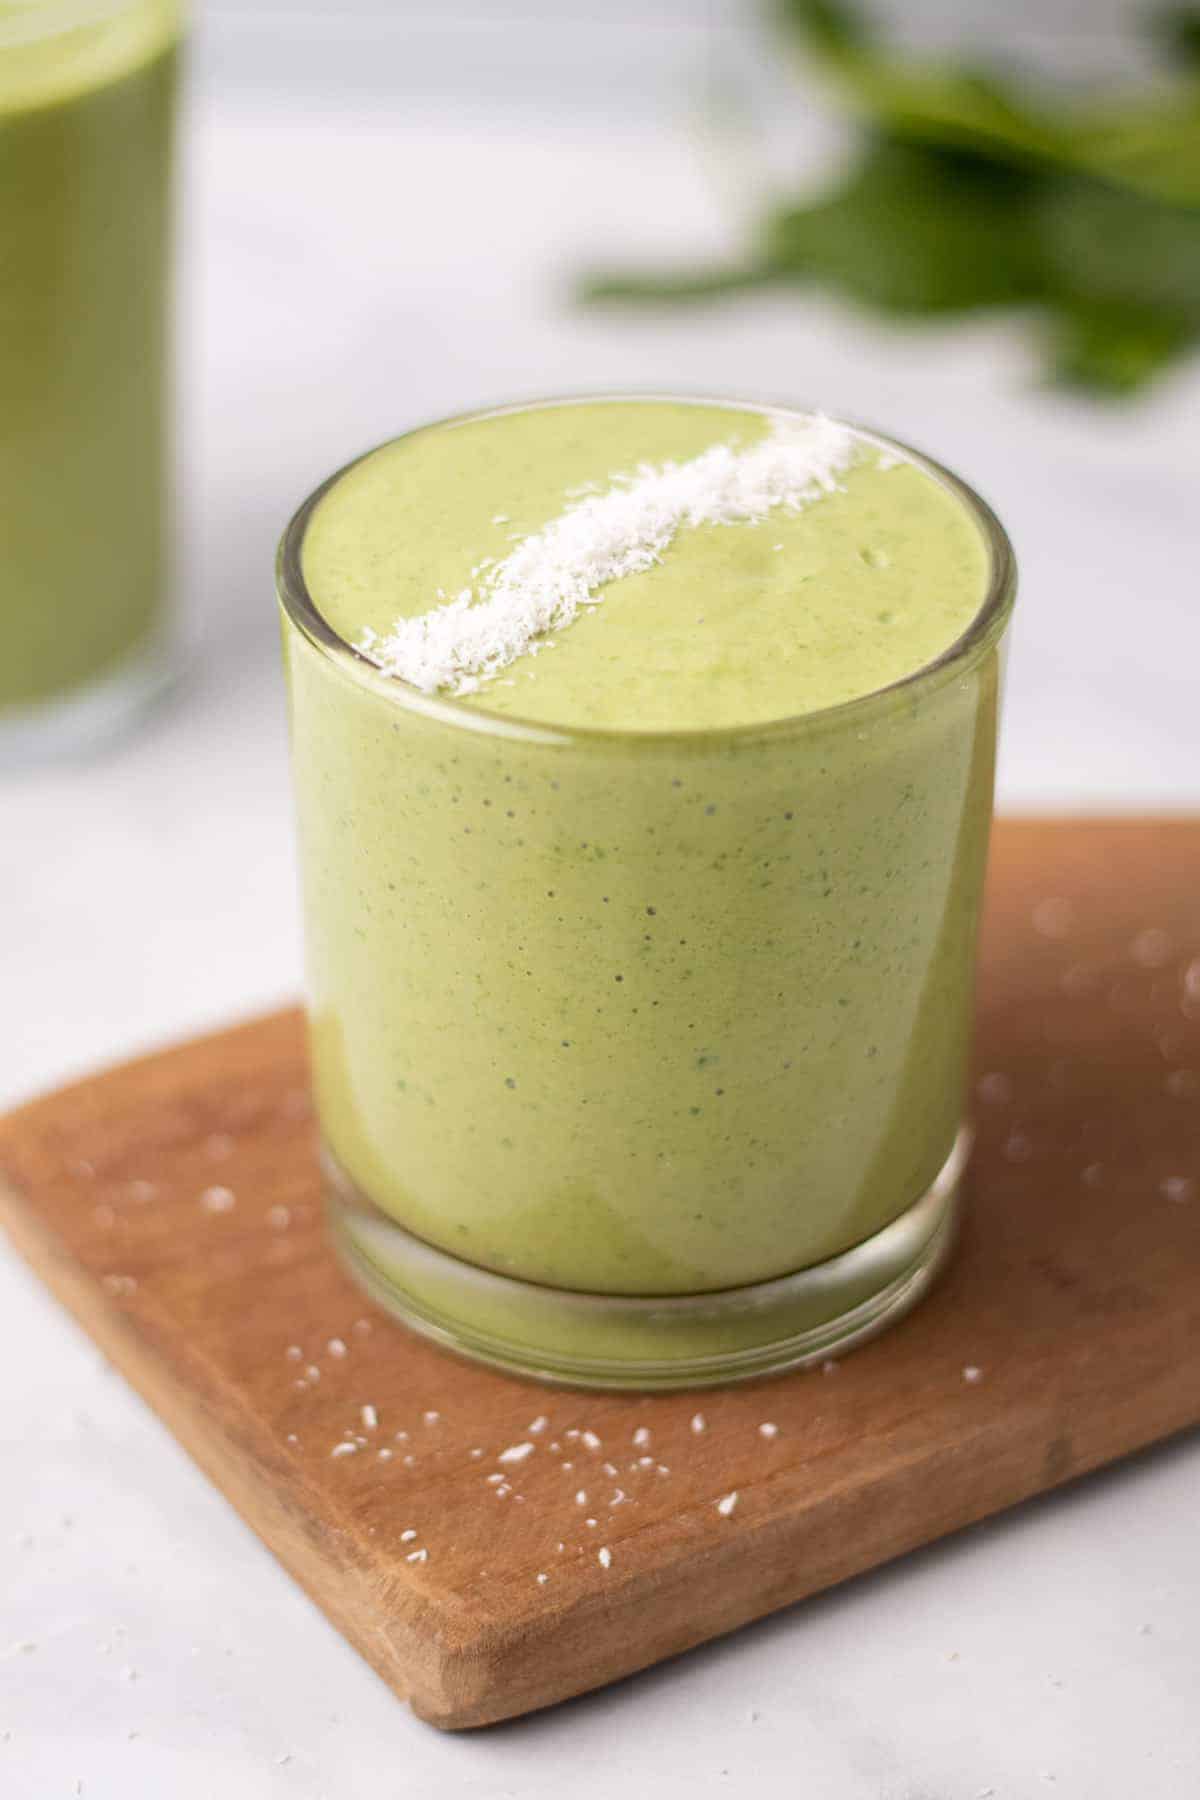 Spinach smoothie topped with finely shredded coconut in a glass on a wooden cutting board